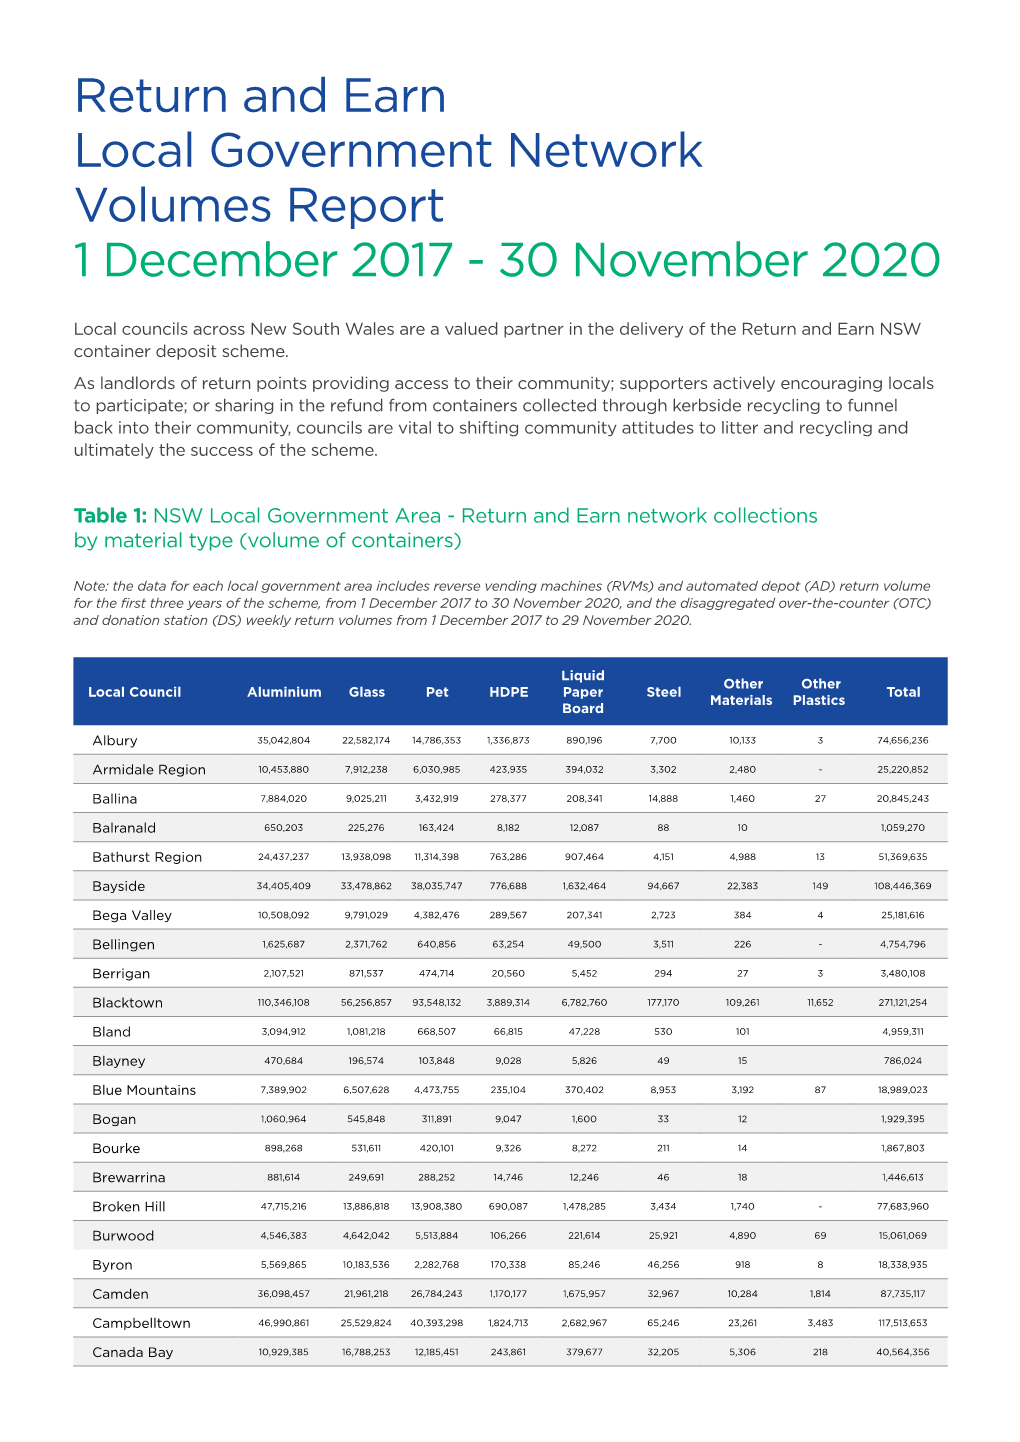 Return and Earn Local Government Network Volumes Report 1 December 2017 - 30 November 2020